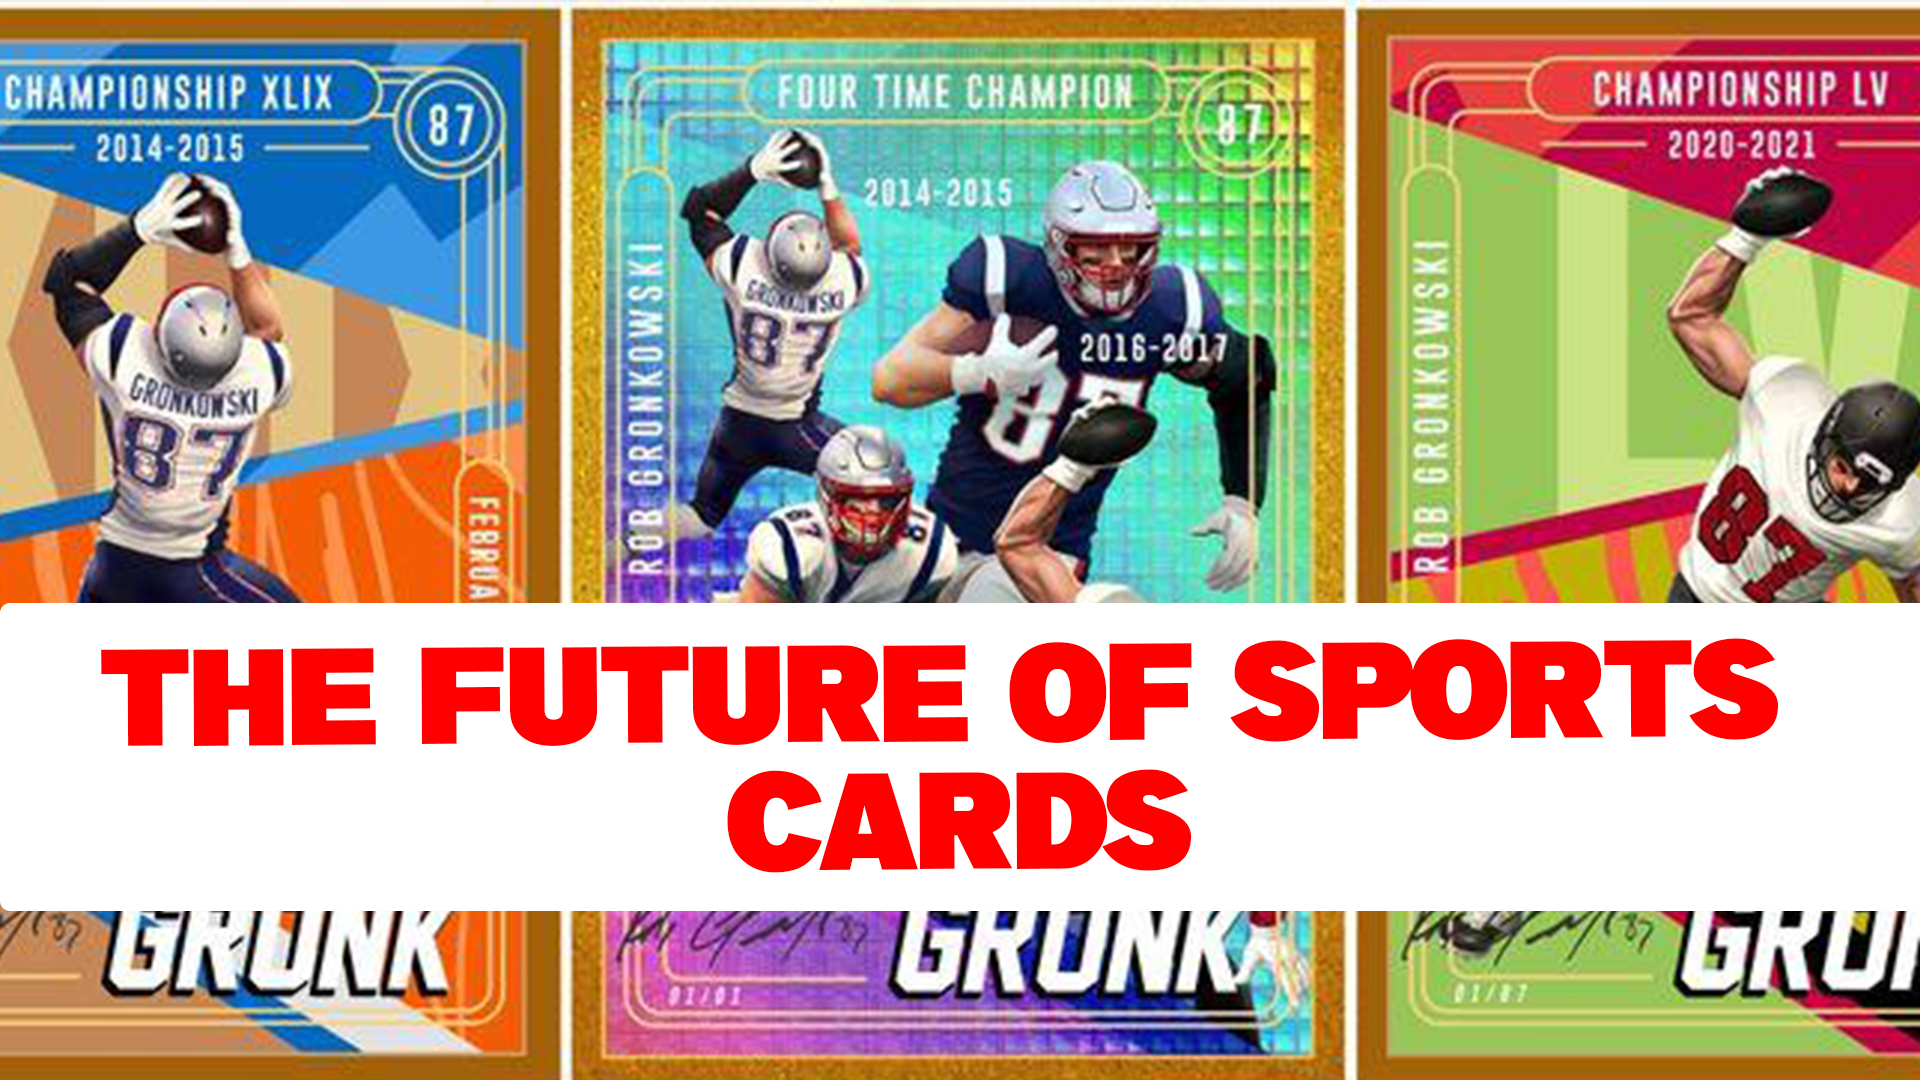 NBA, TOPPS, MLB, AND NFL NFT SPORTS CARDS